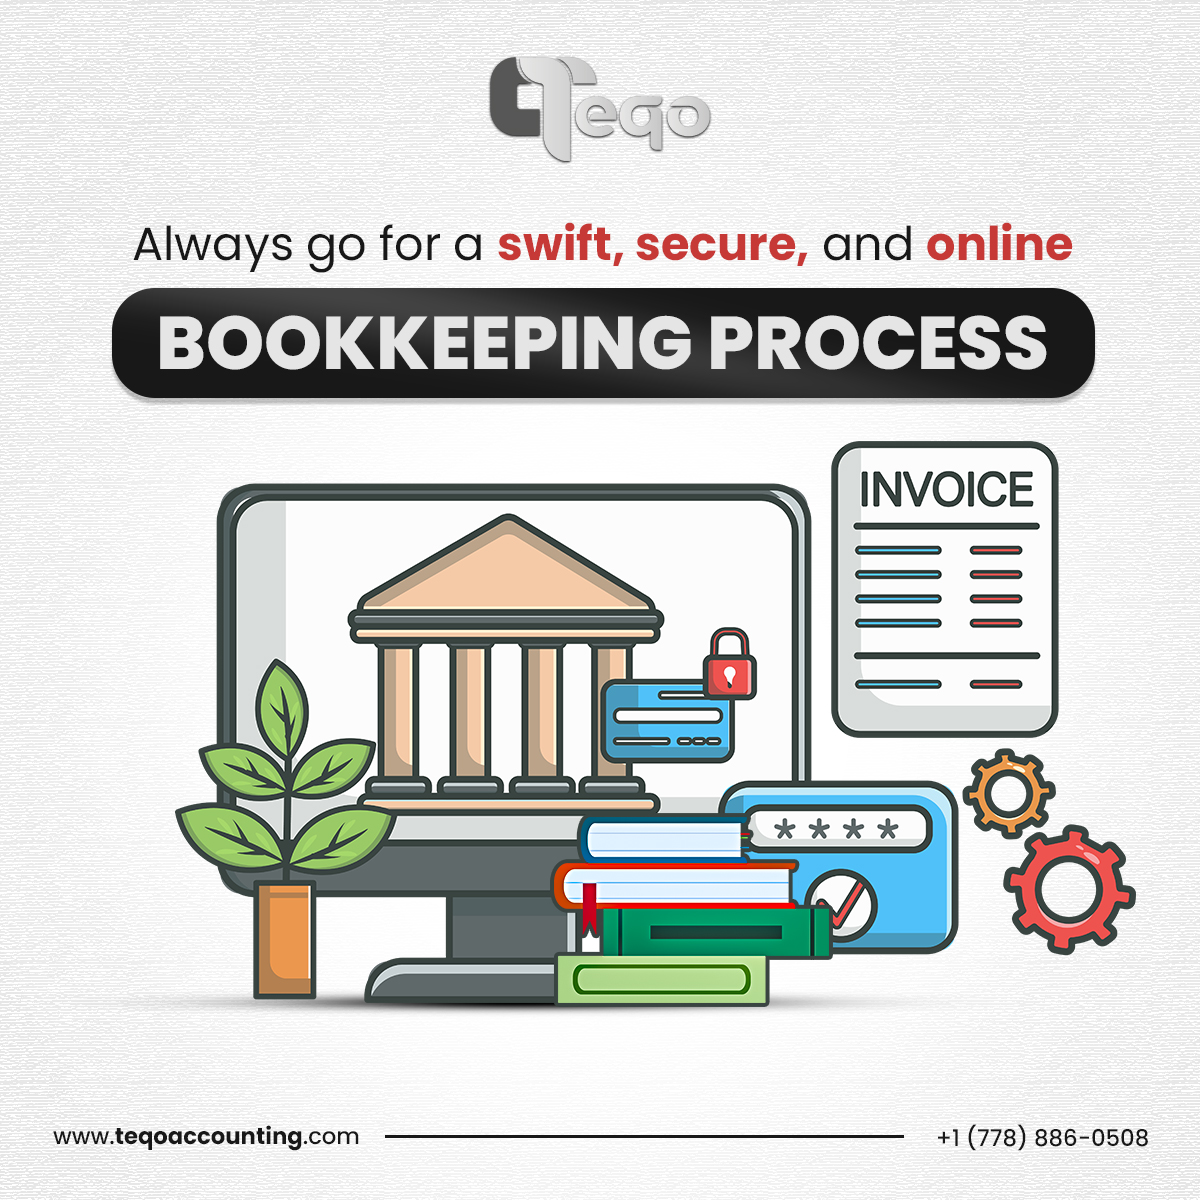 Always go for a swift, secure, and online

BOOKKEEPING PROCESS

 

www.teqoaccounting.com ——0o0o2o— 4+](778) 886-0508